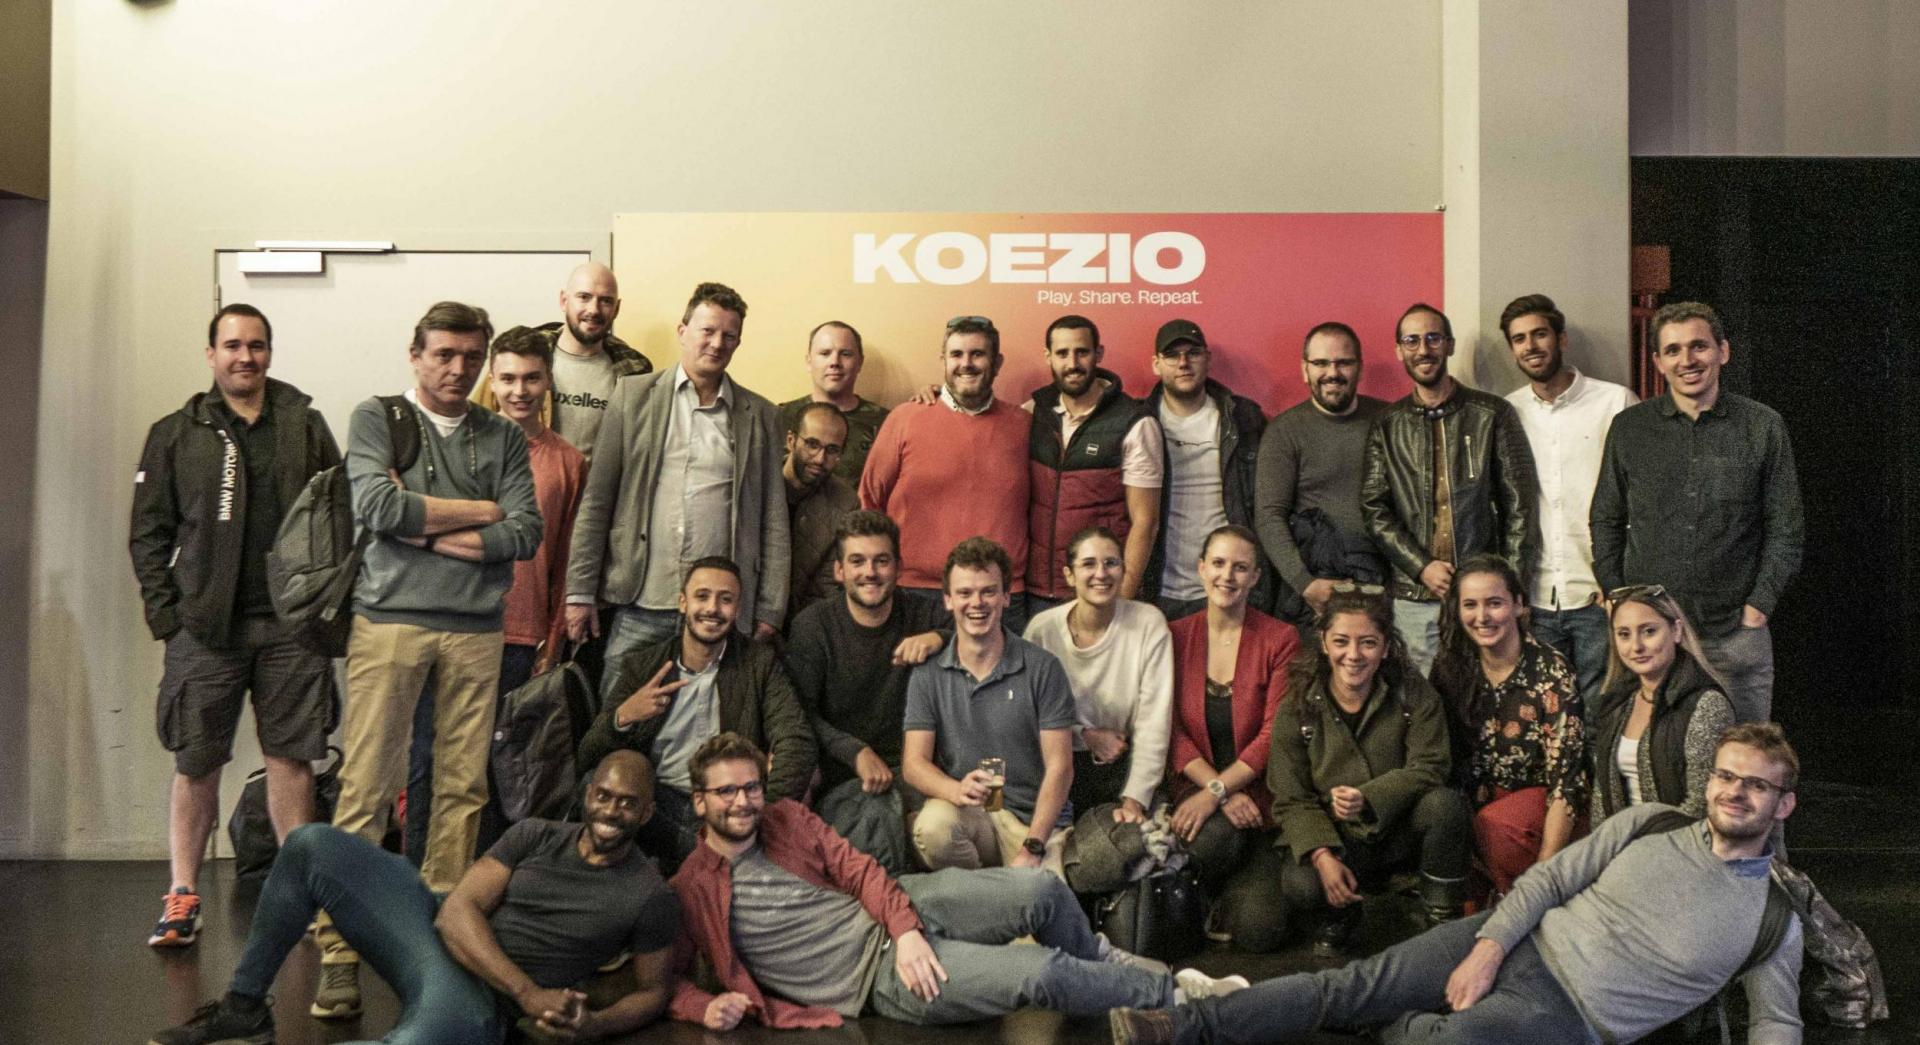 About our last Afterwork at KOEZIO